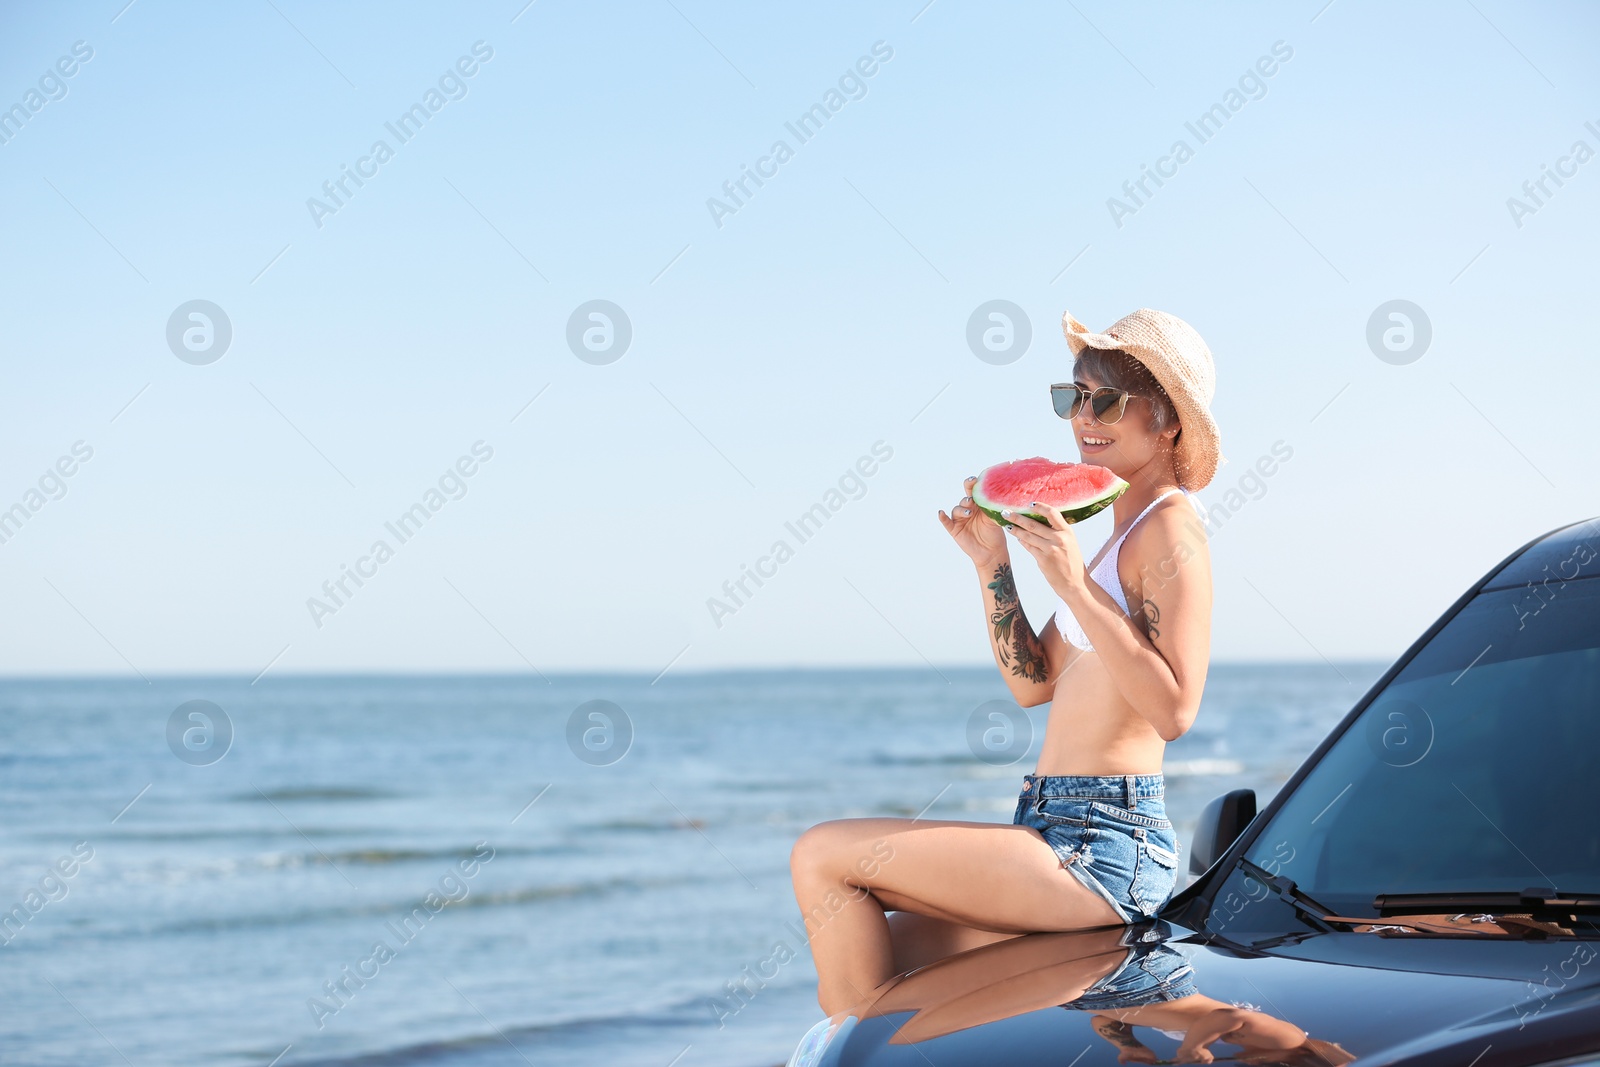 Photo of Young woman with watermelon slice near car on beach. Space for text